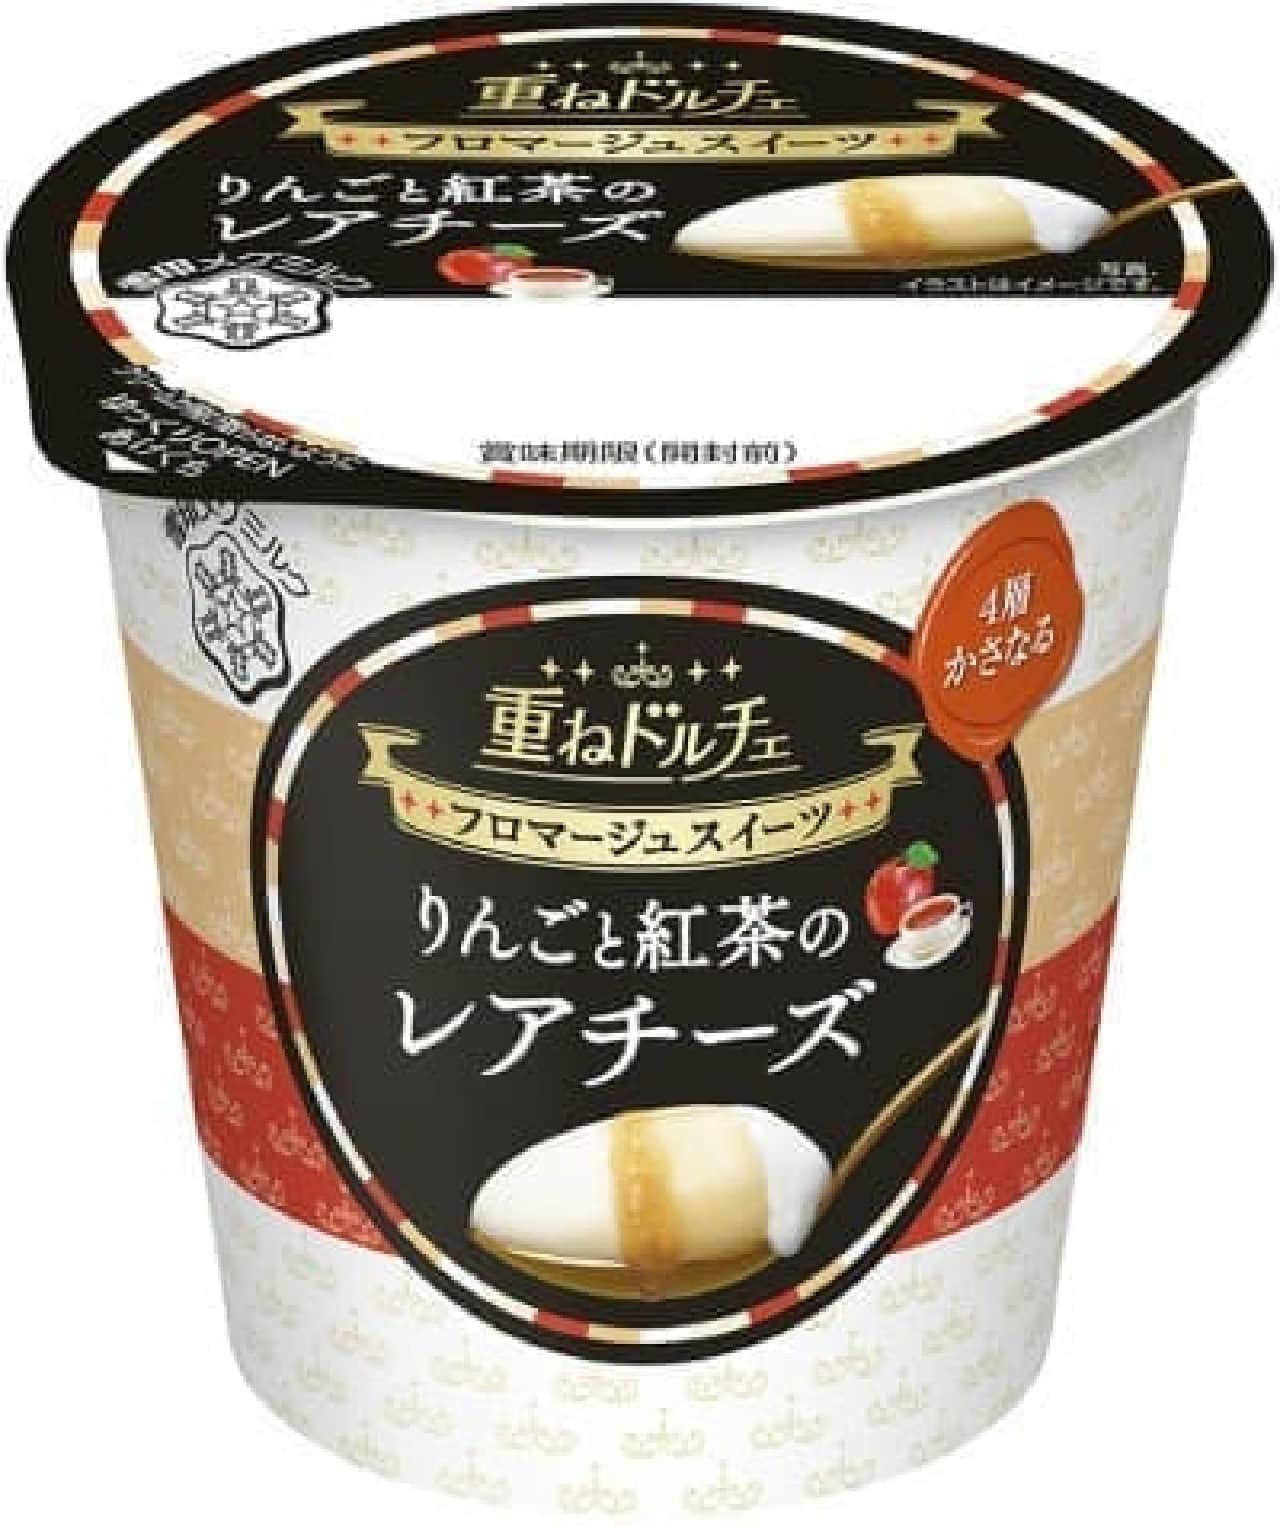 Snow Brand Megmilk "Layered Dolce Apples and Tea Rare Cheese"